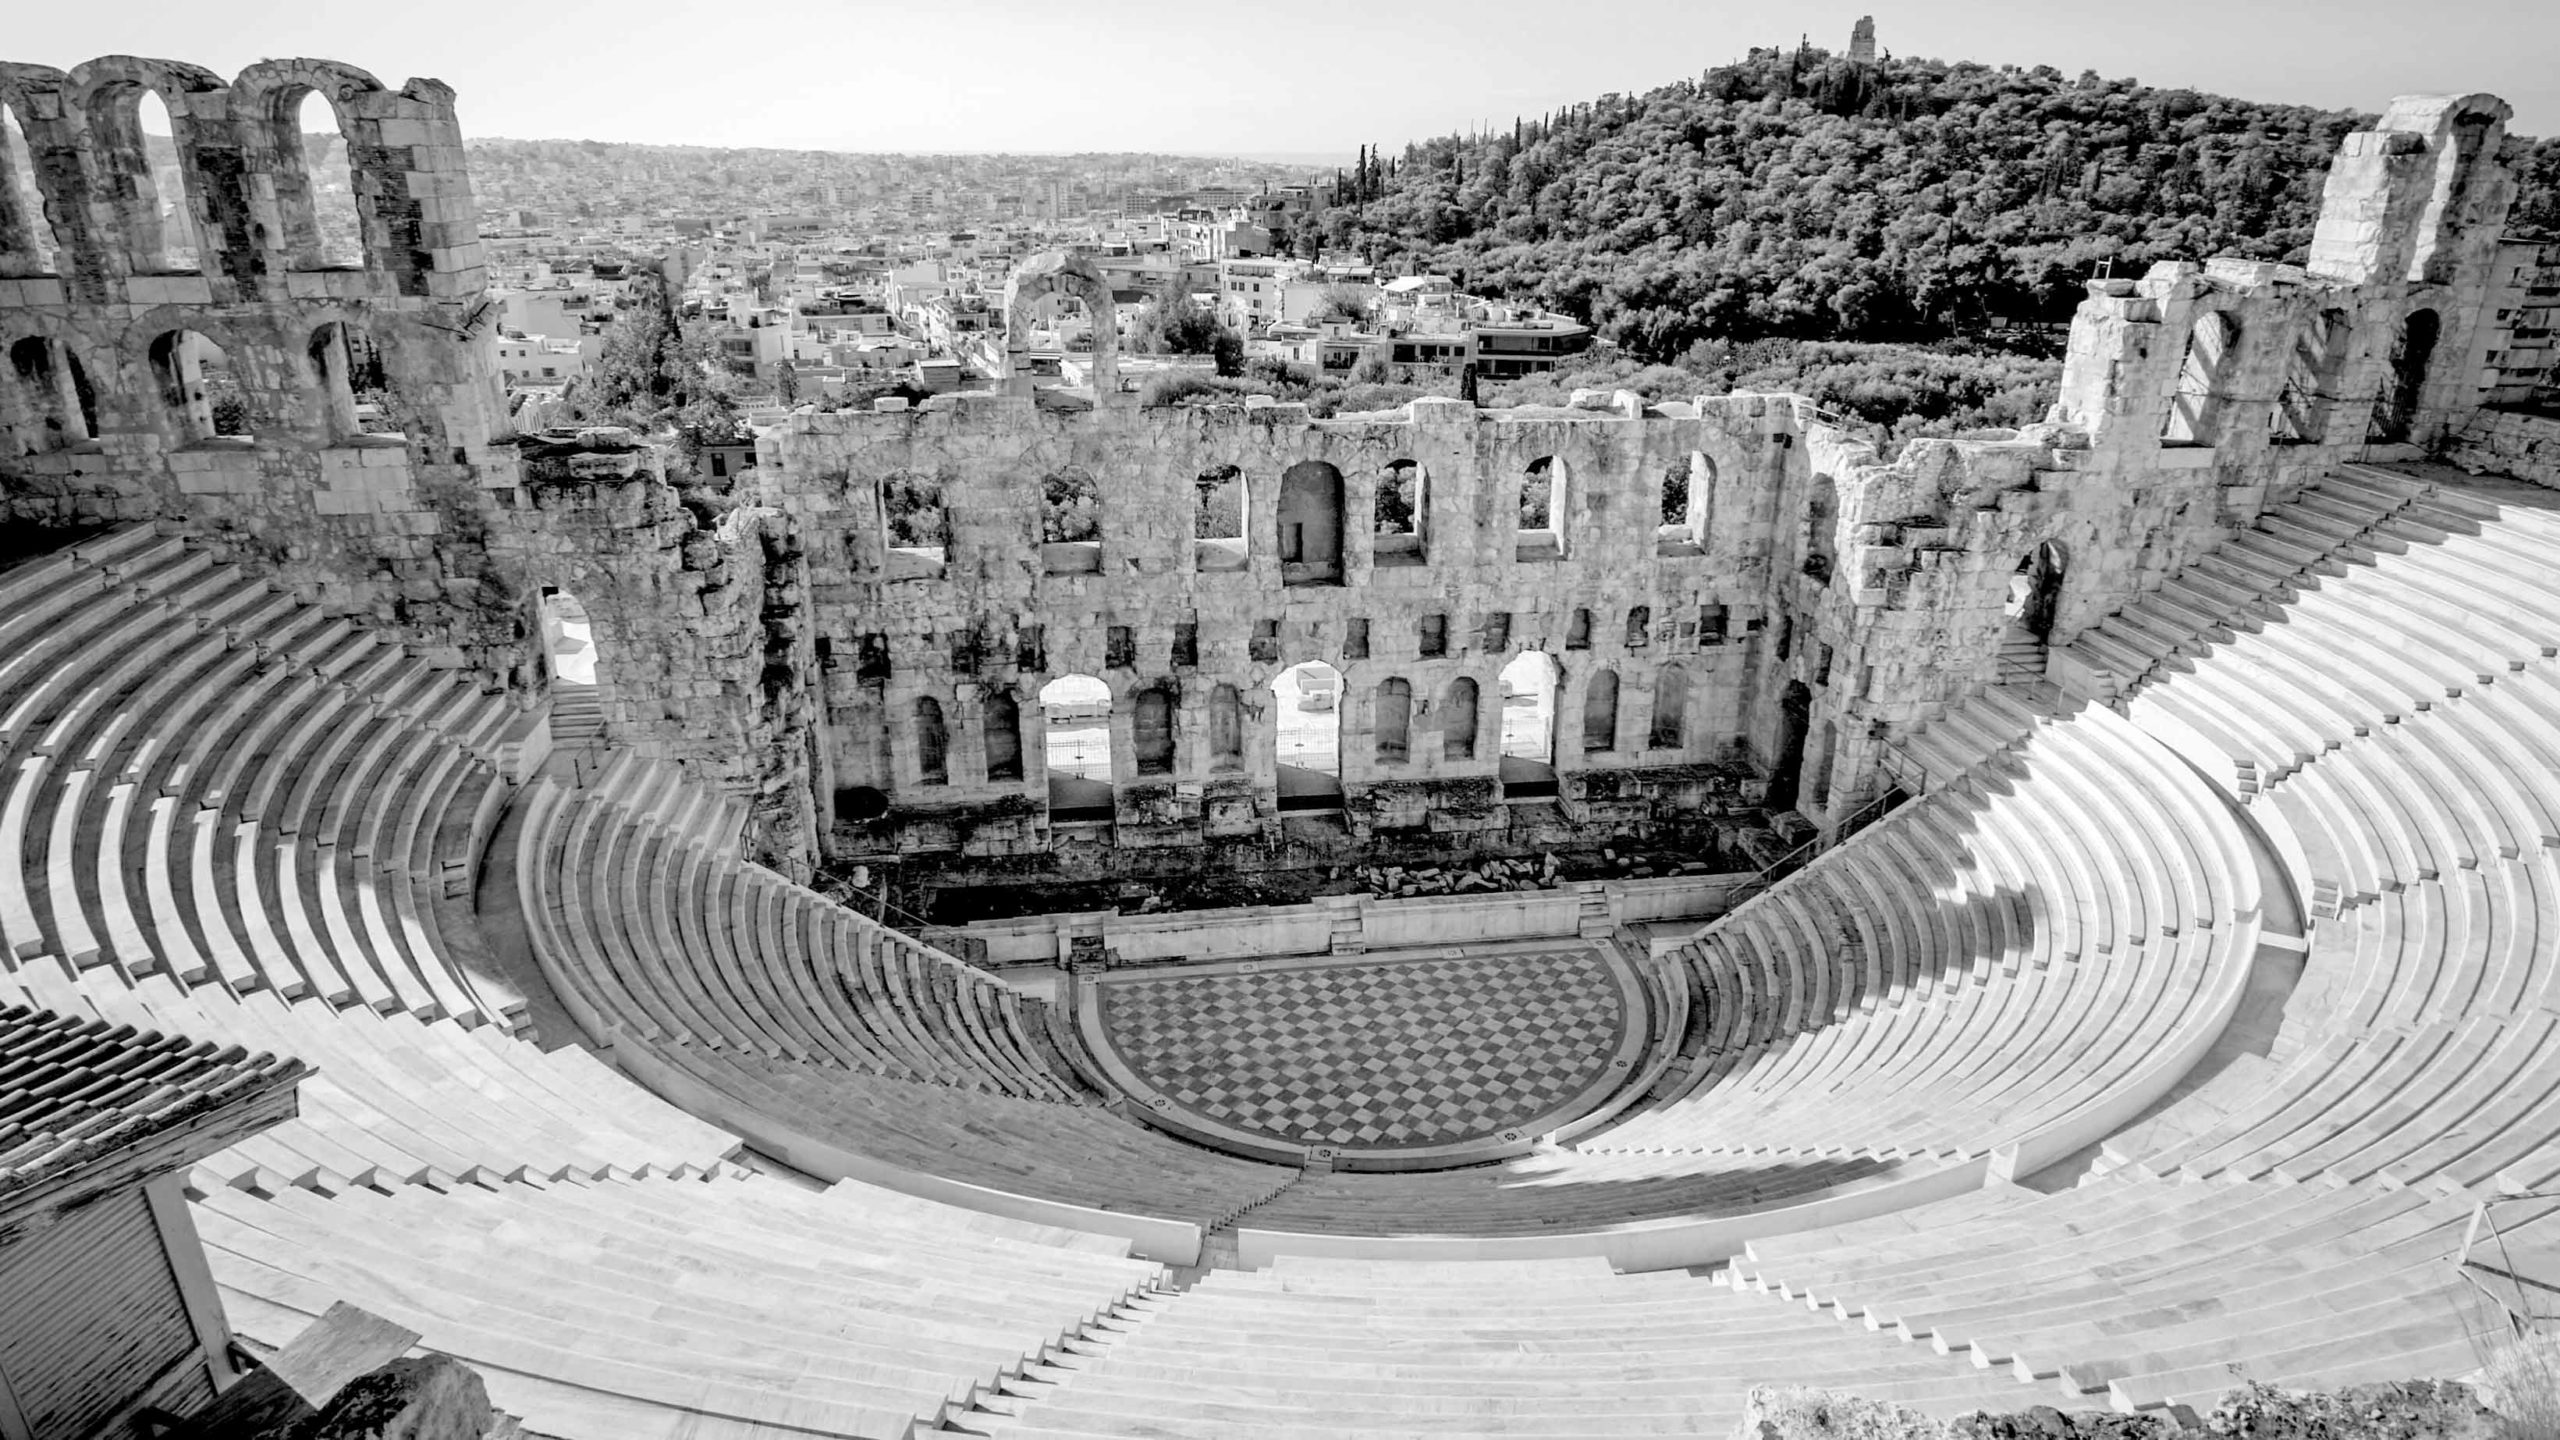 Ancient ruins of the Dionysus Greek theater below the Acropolis in Athens, Greece.